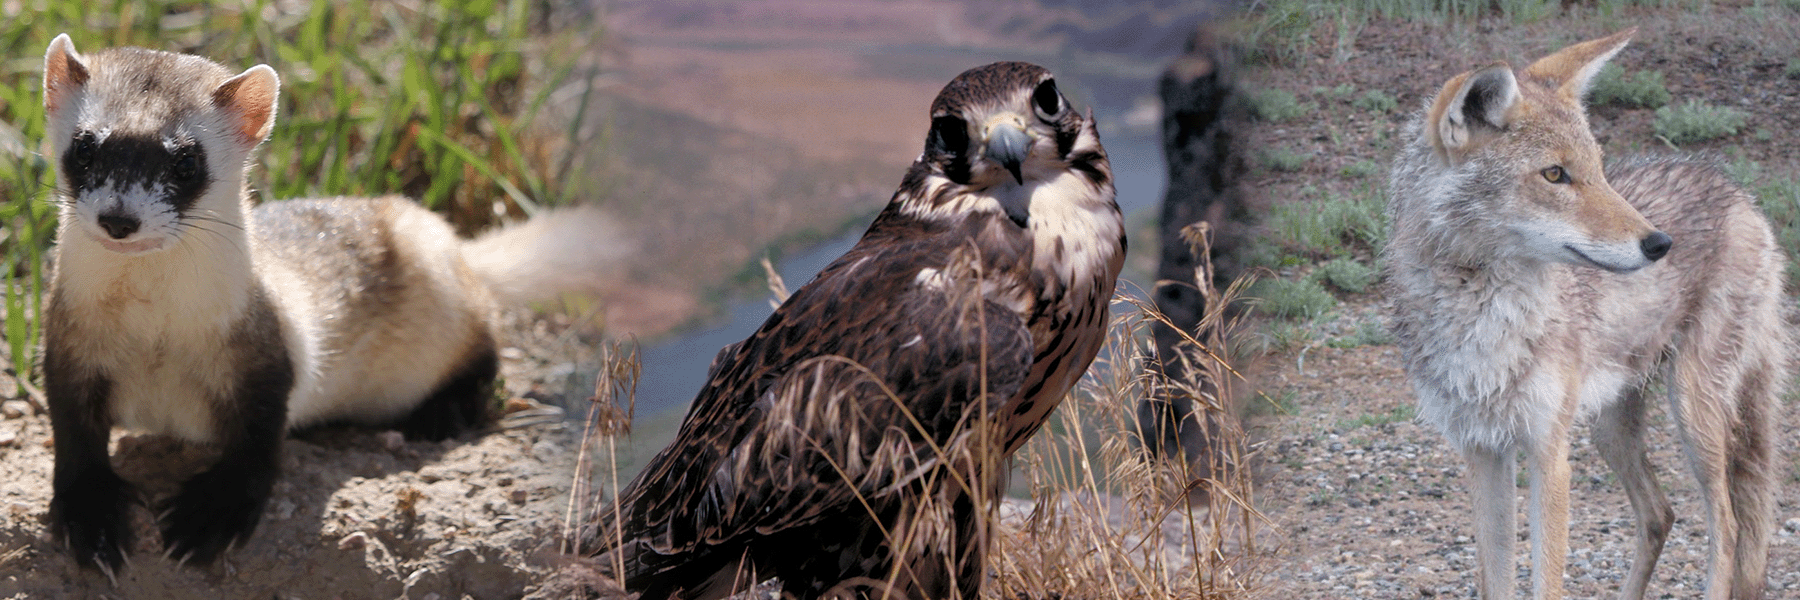 A black-footed ferret, hawk, and coyote in the wild